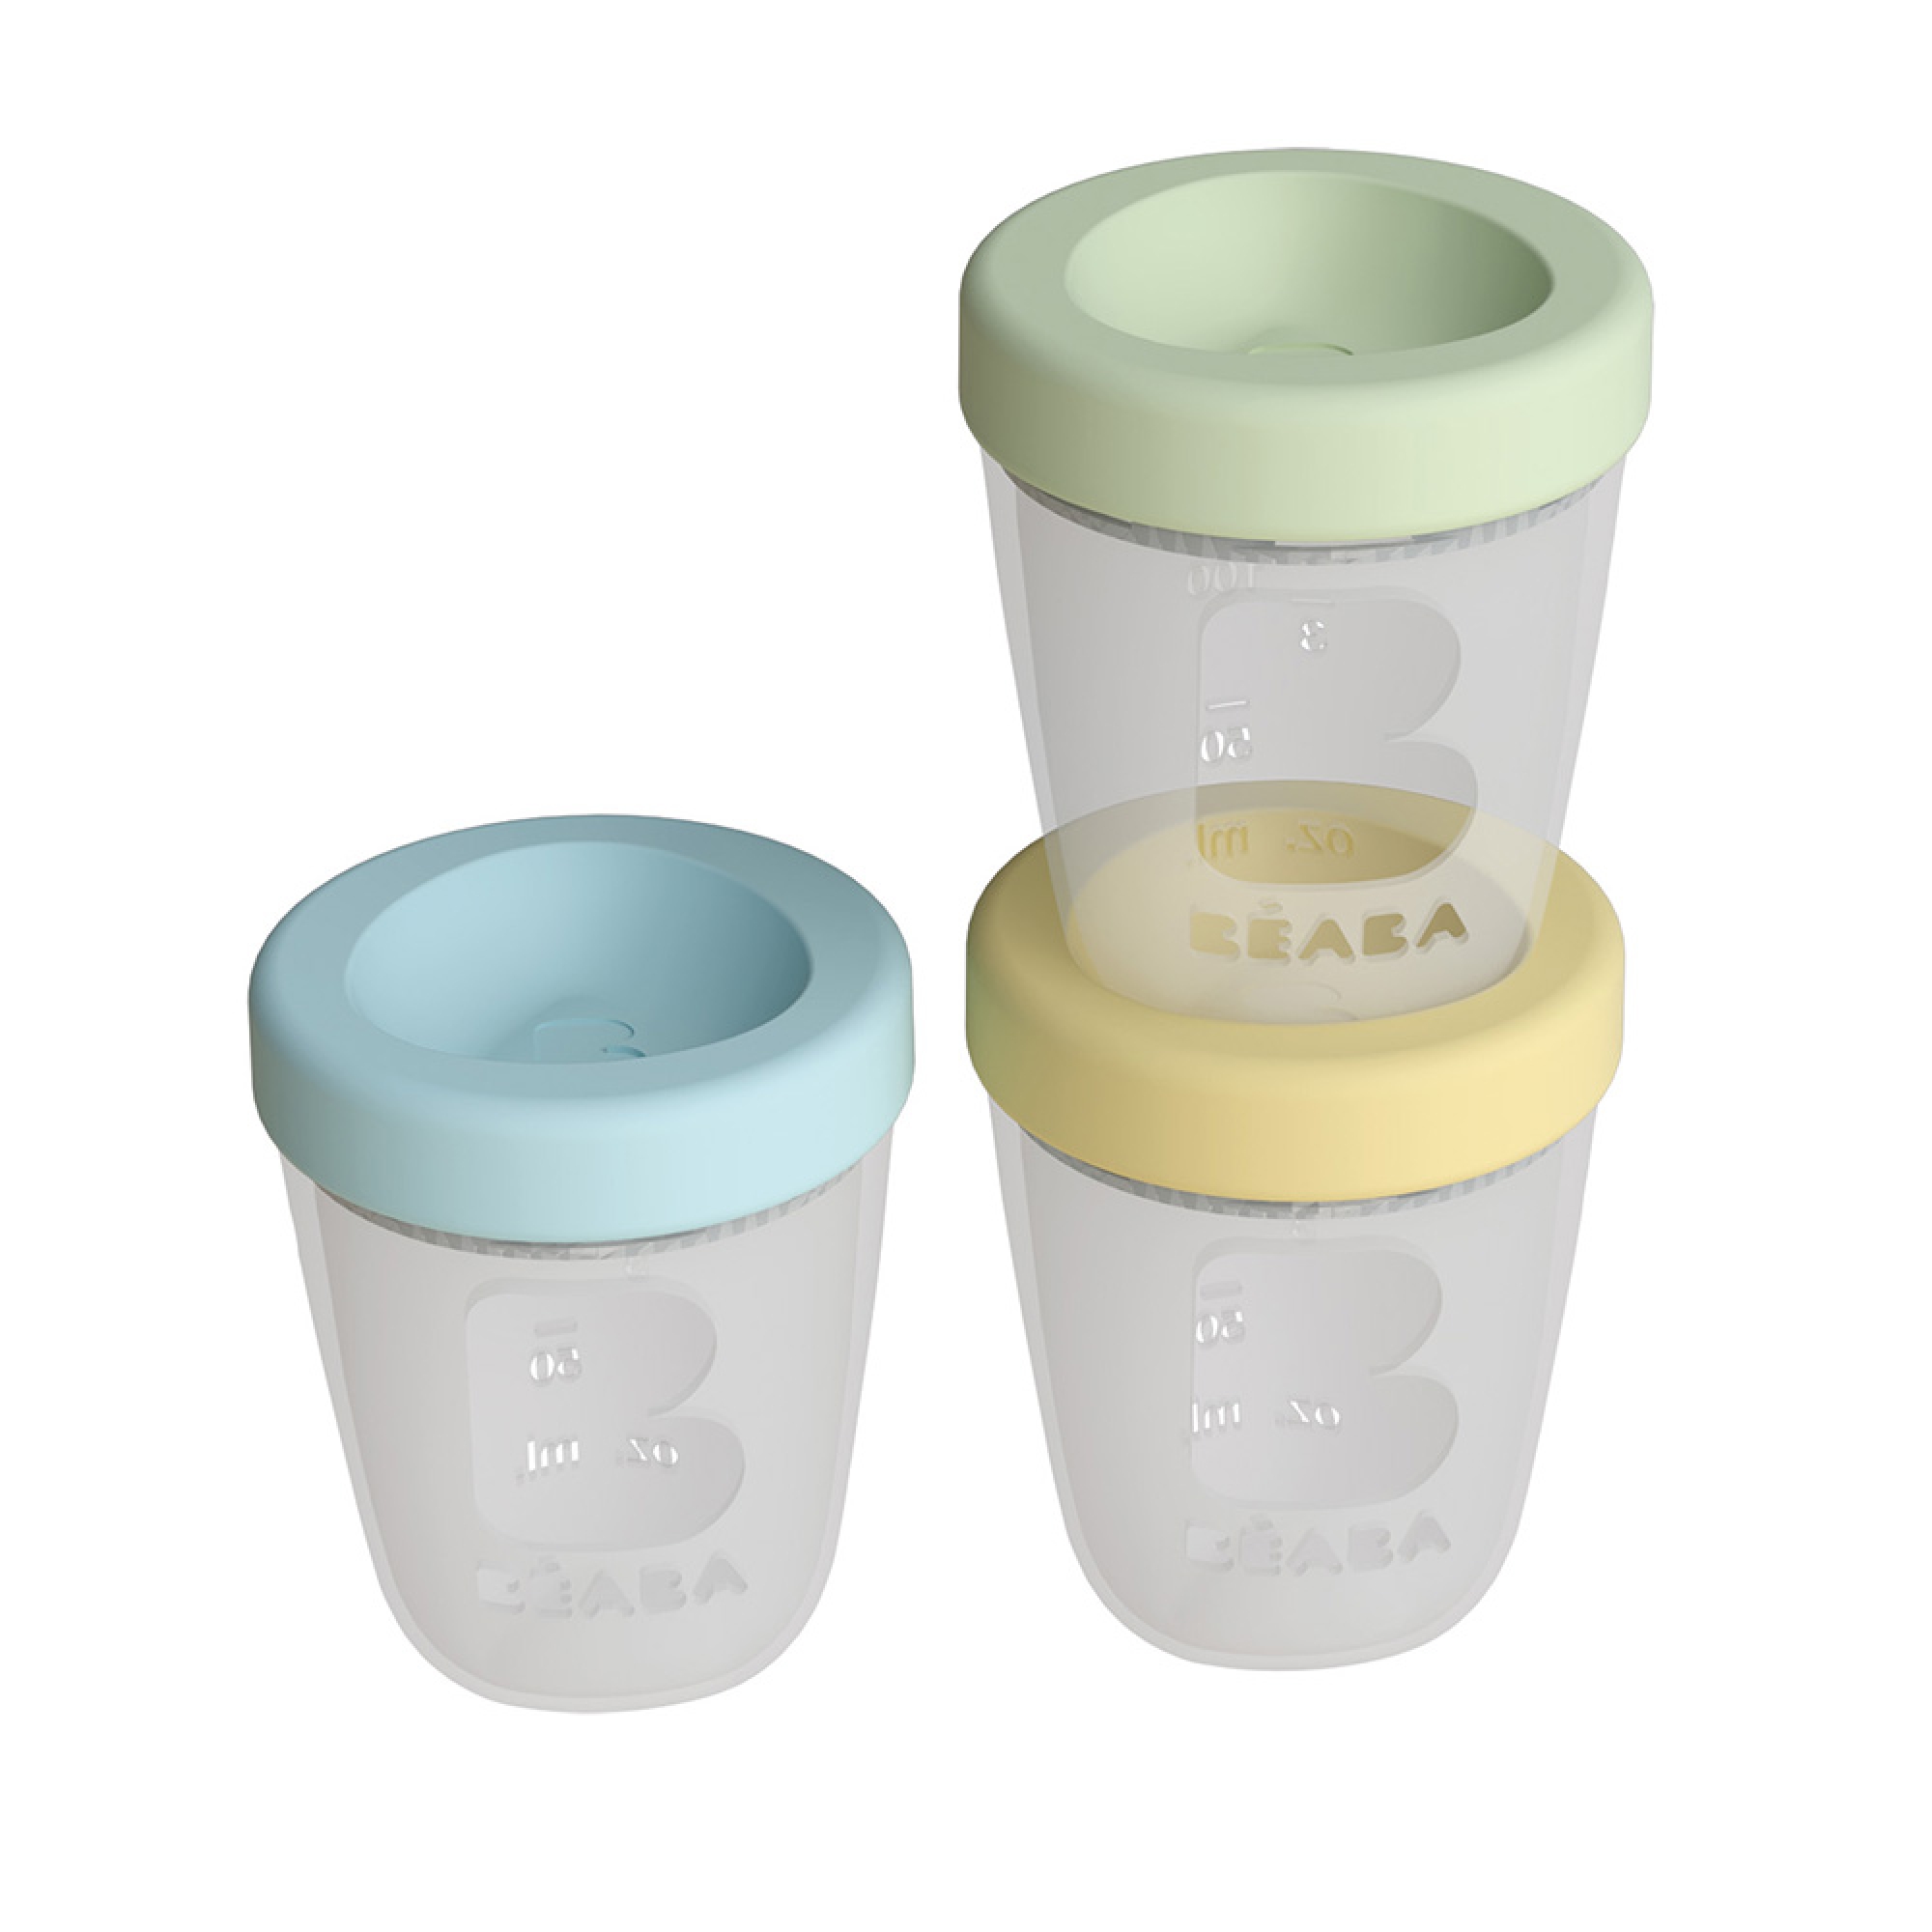 Beaba Lot De 3 Pots De Conservations Portions Silicone 300 Ml Made In Bebe